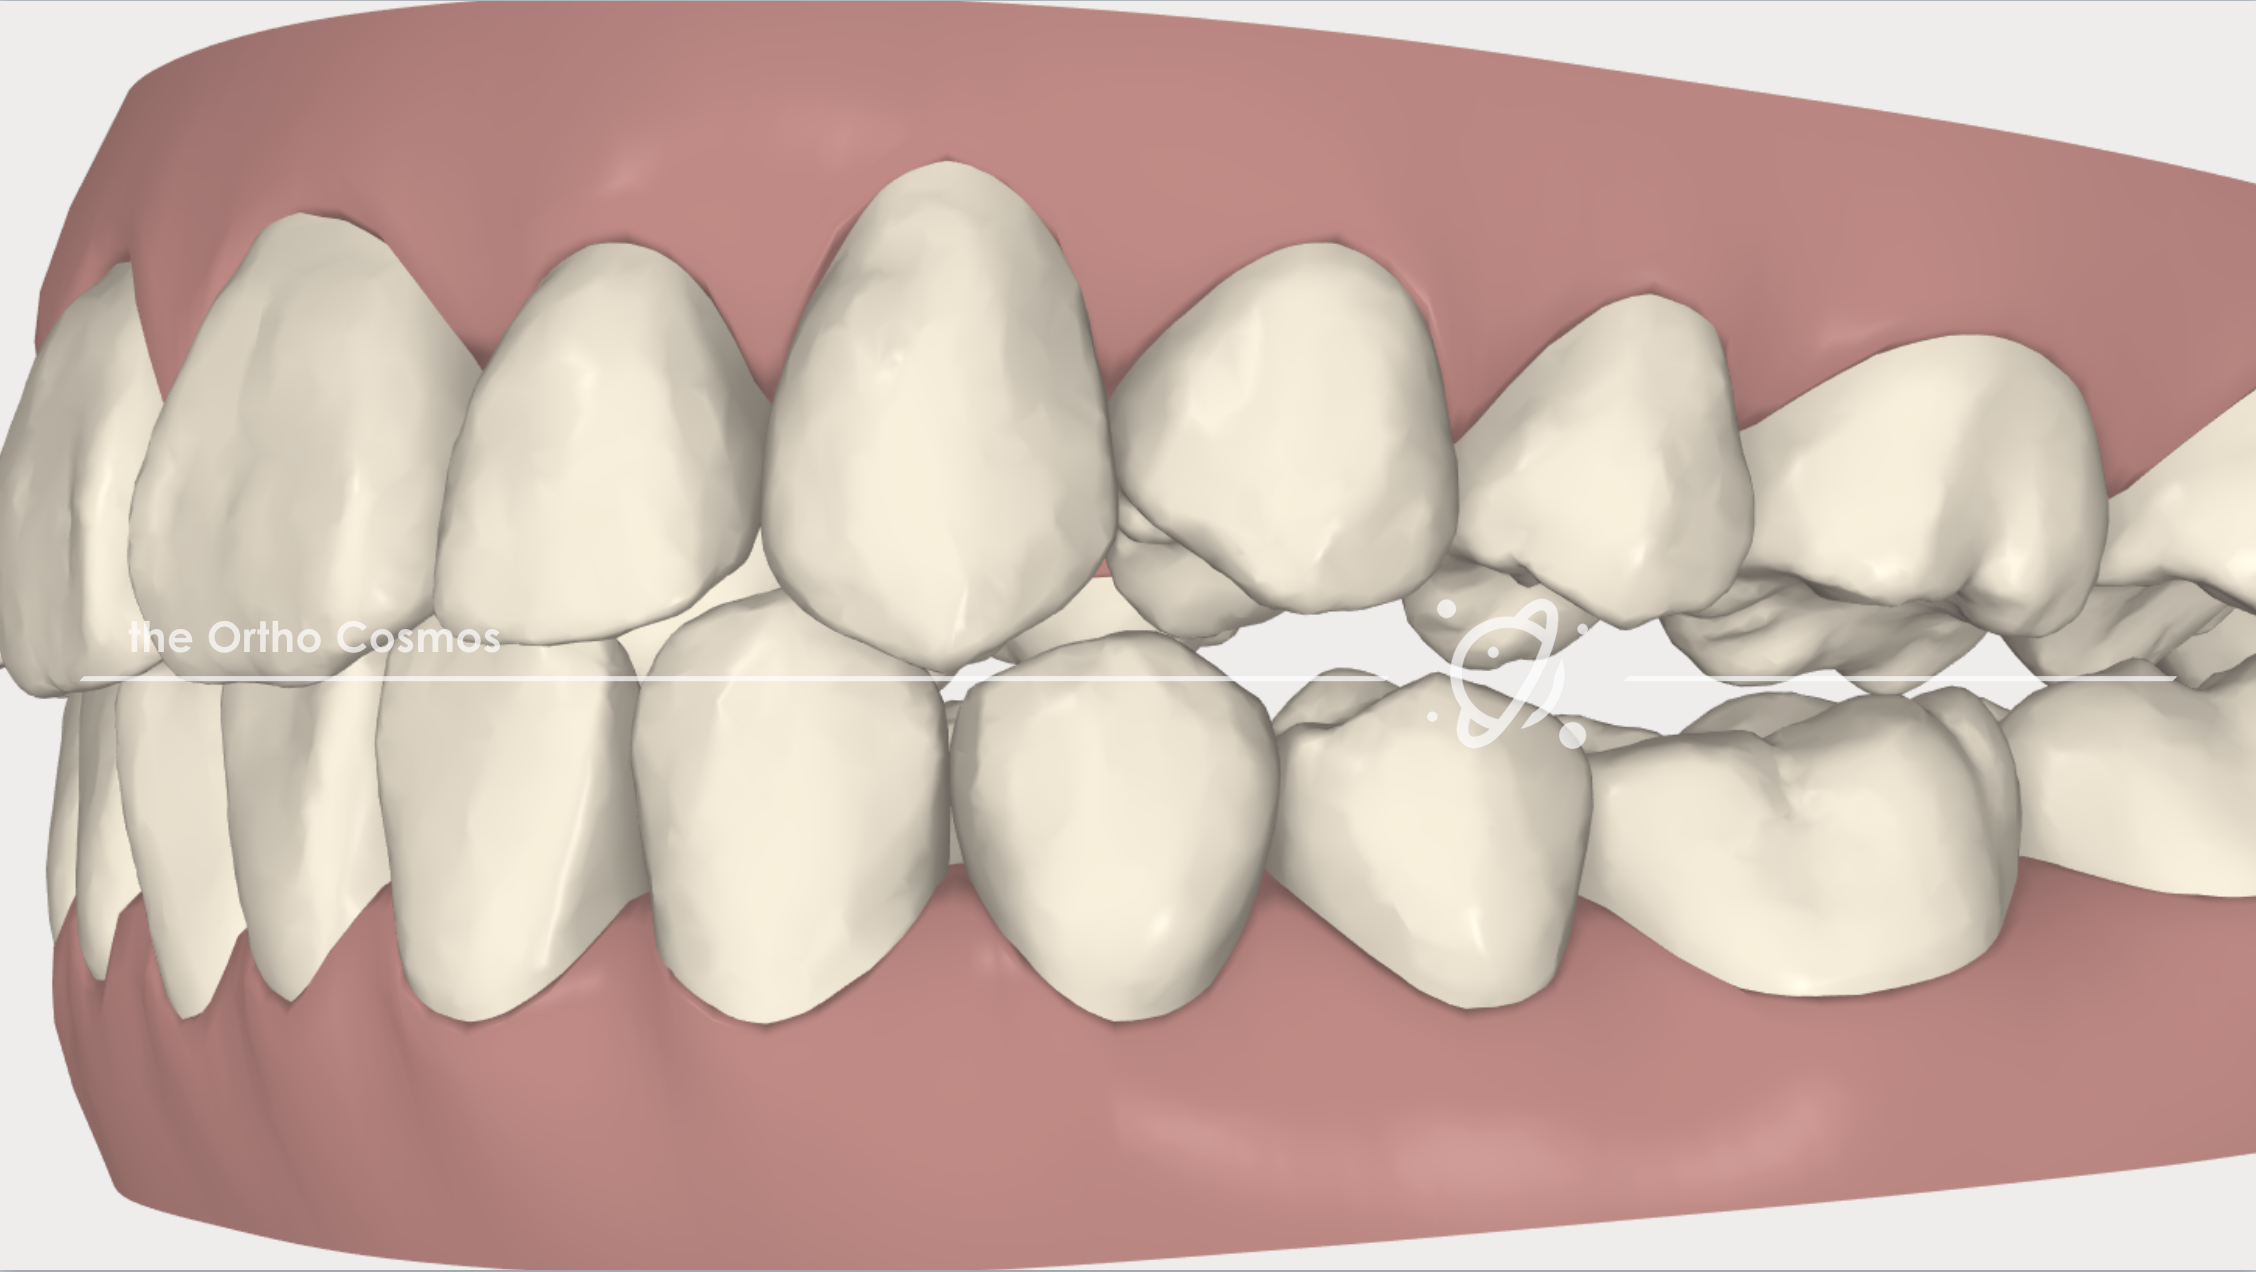 Posterior Openbites with Aligners - The Ortho Cosmos.